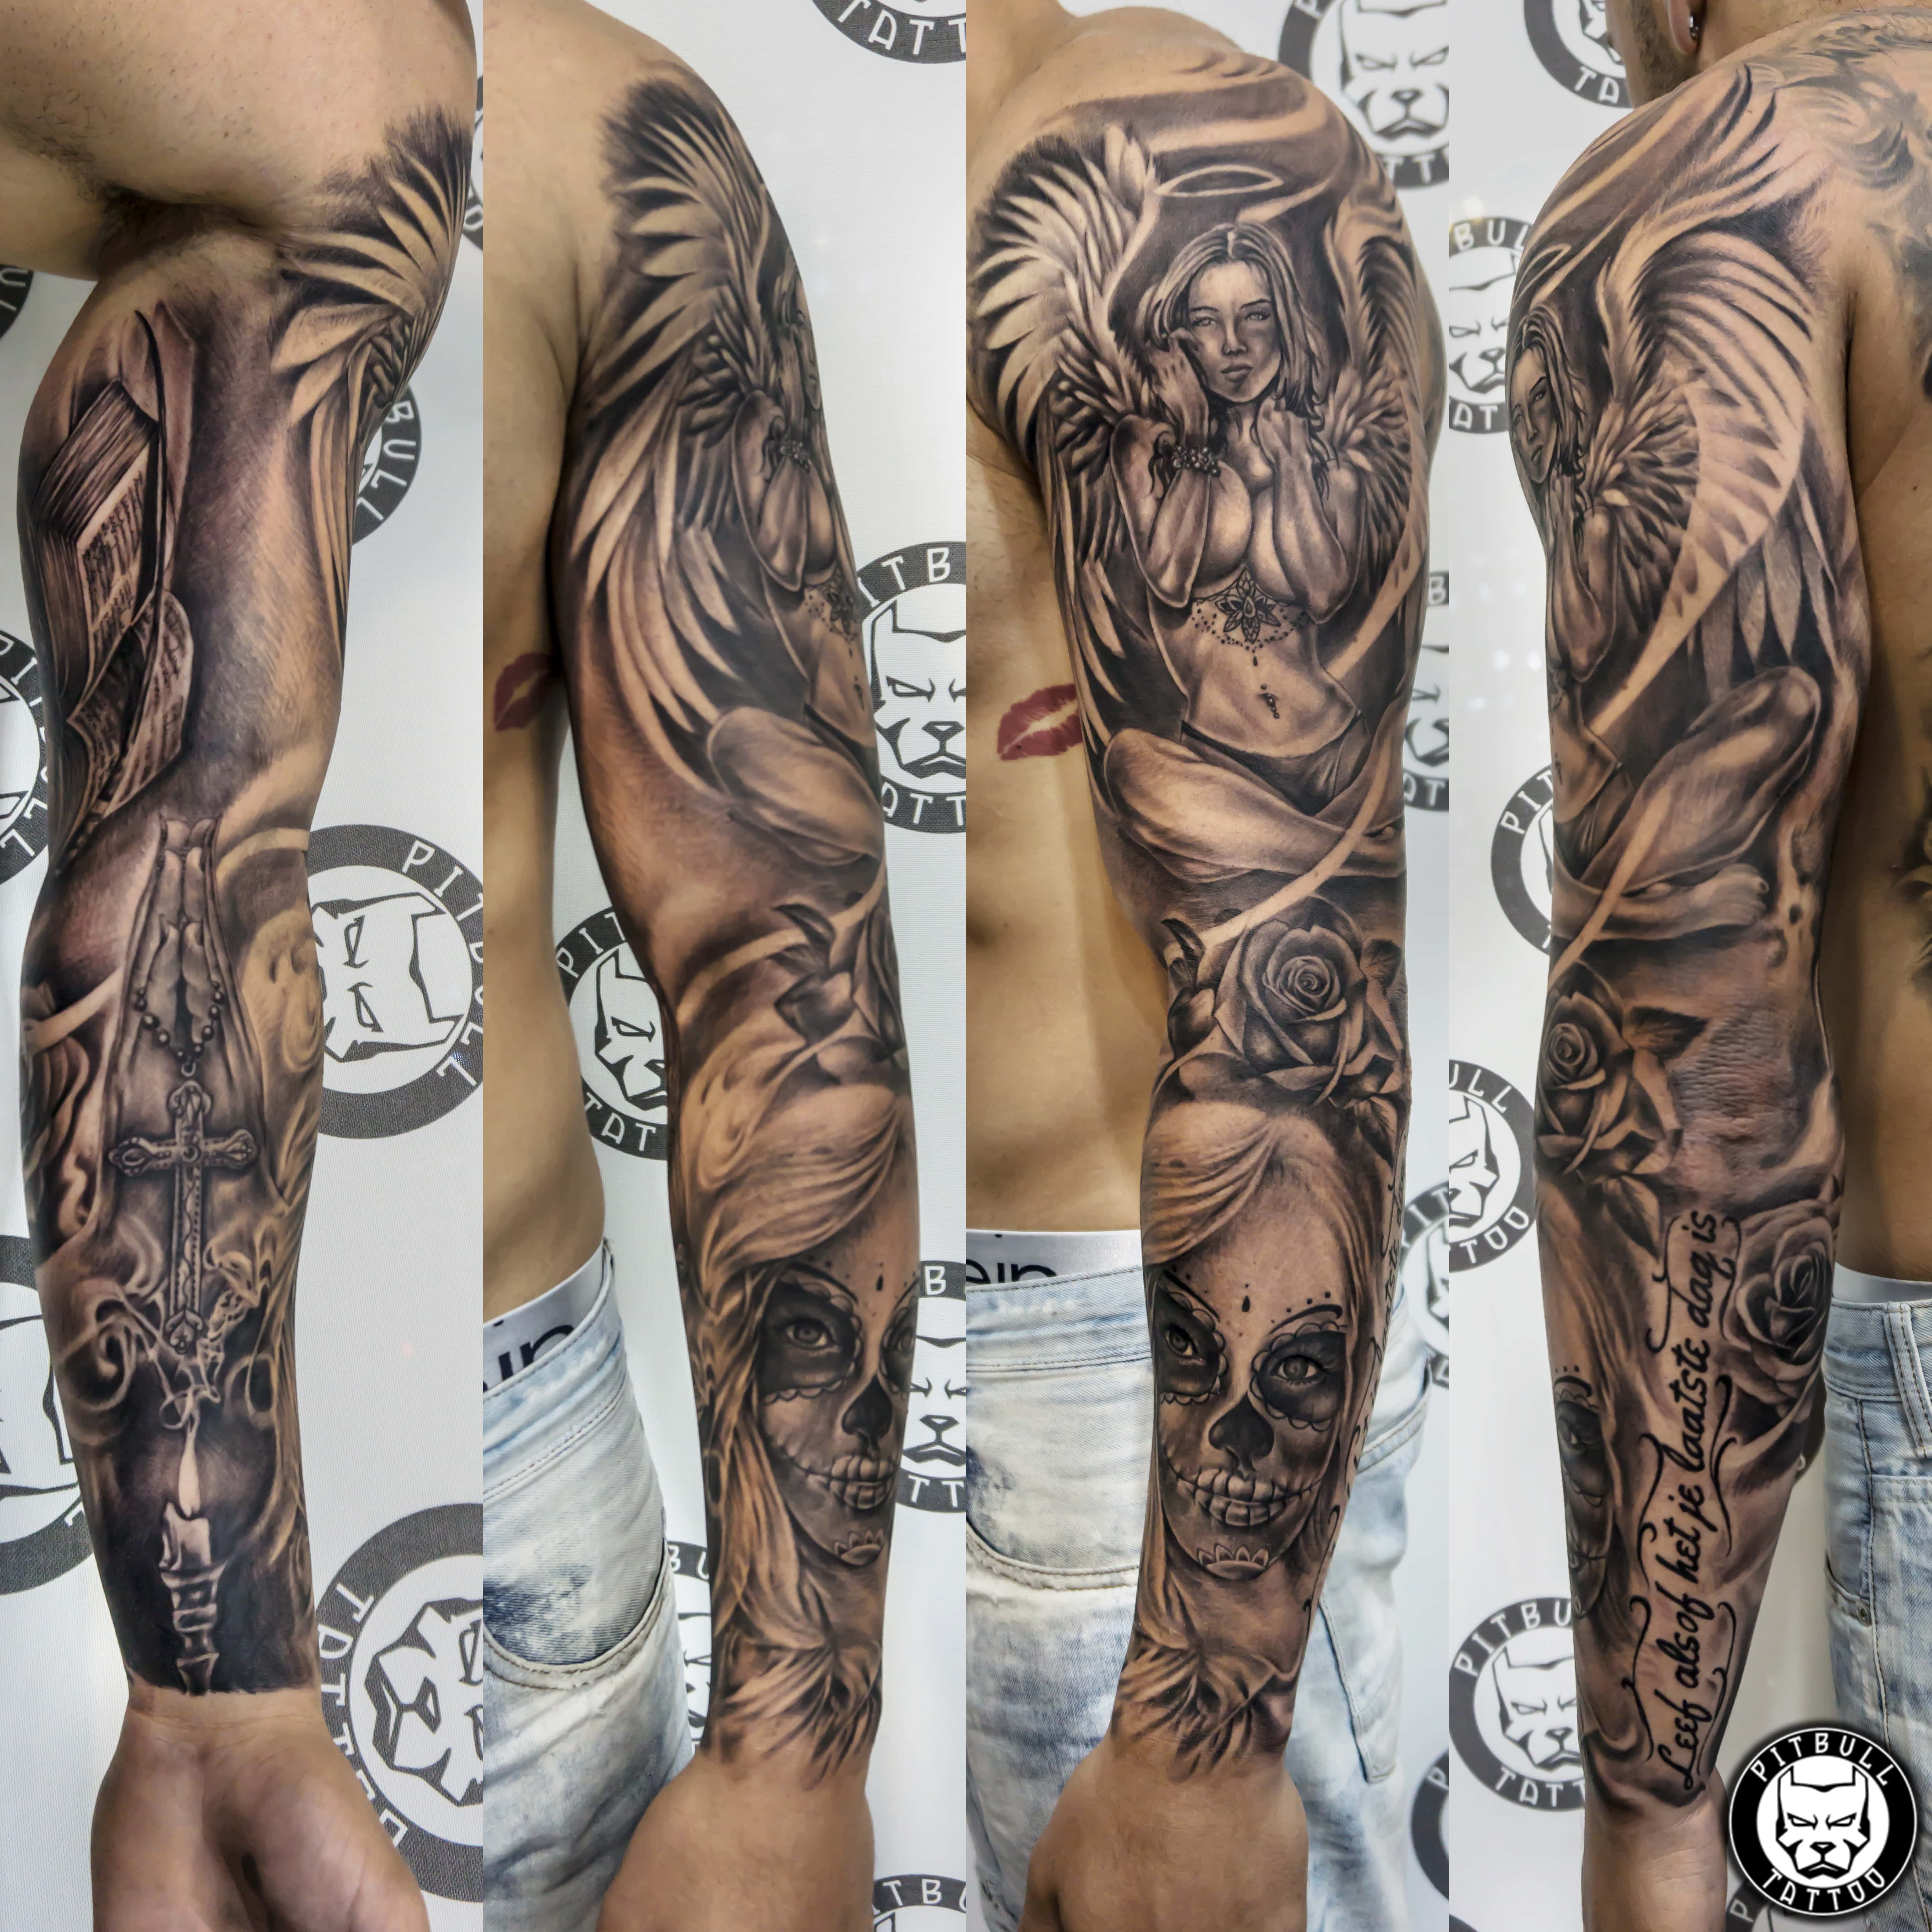 Schedule online with Pitbull Tattoo Thailand on 